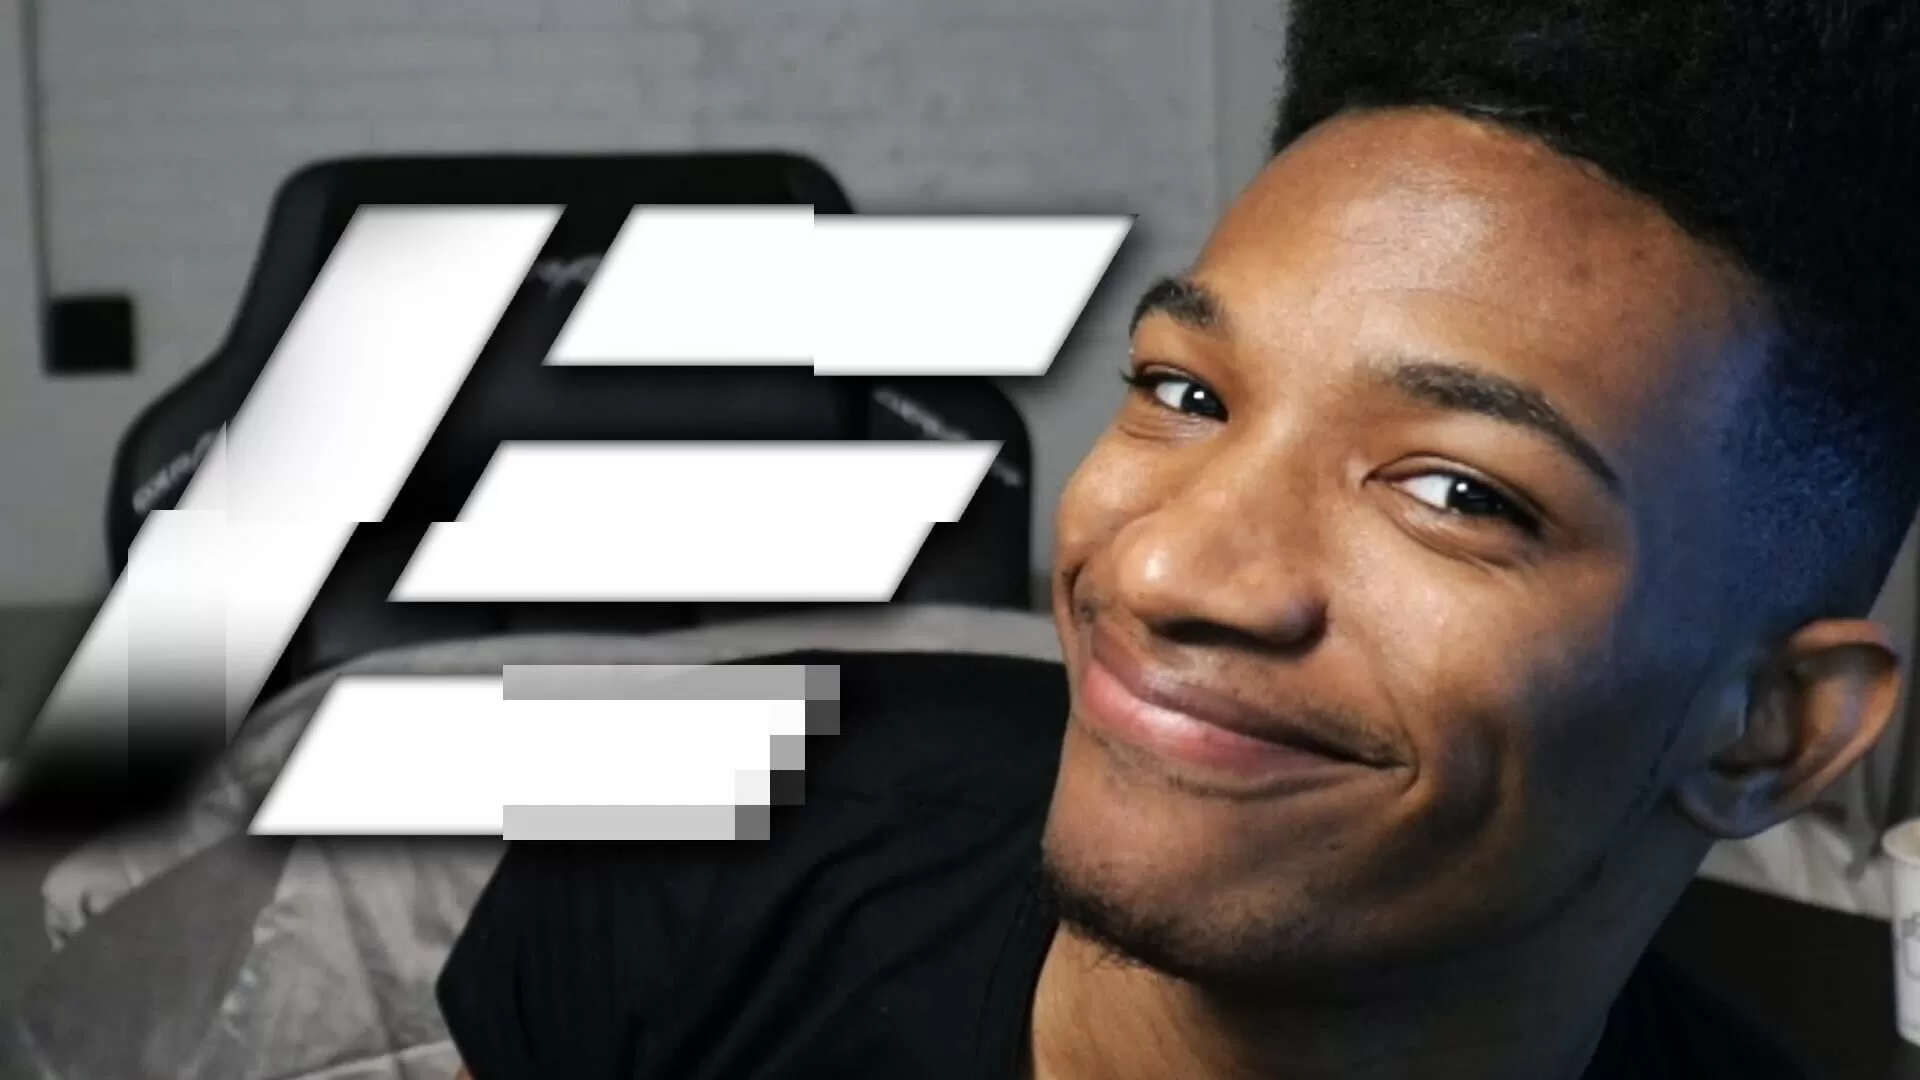 Professor recommend best of deleted etika channel